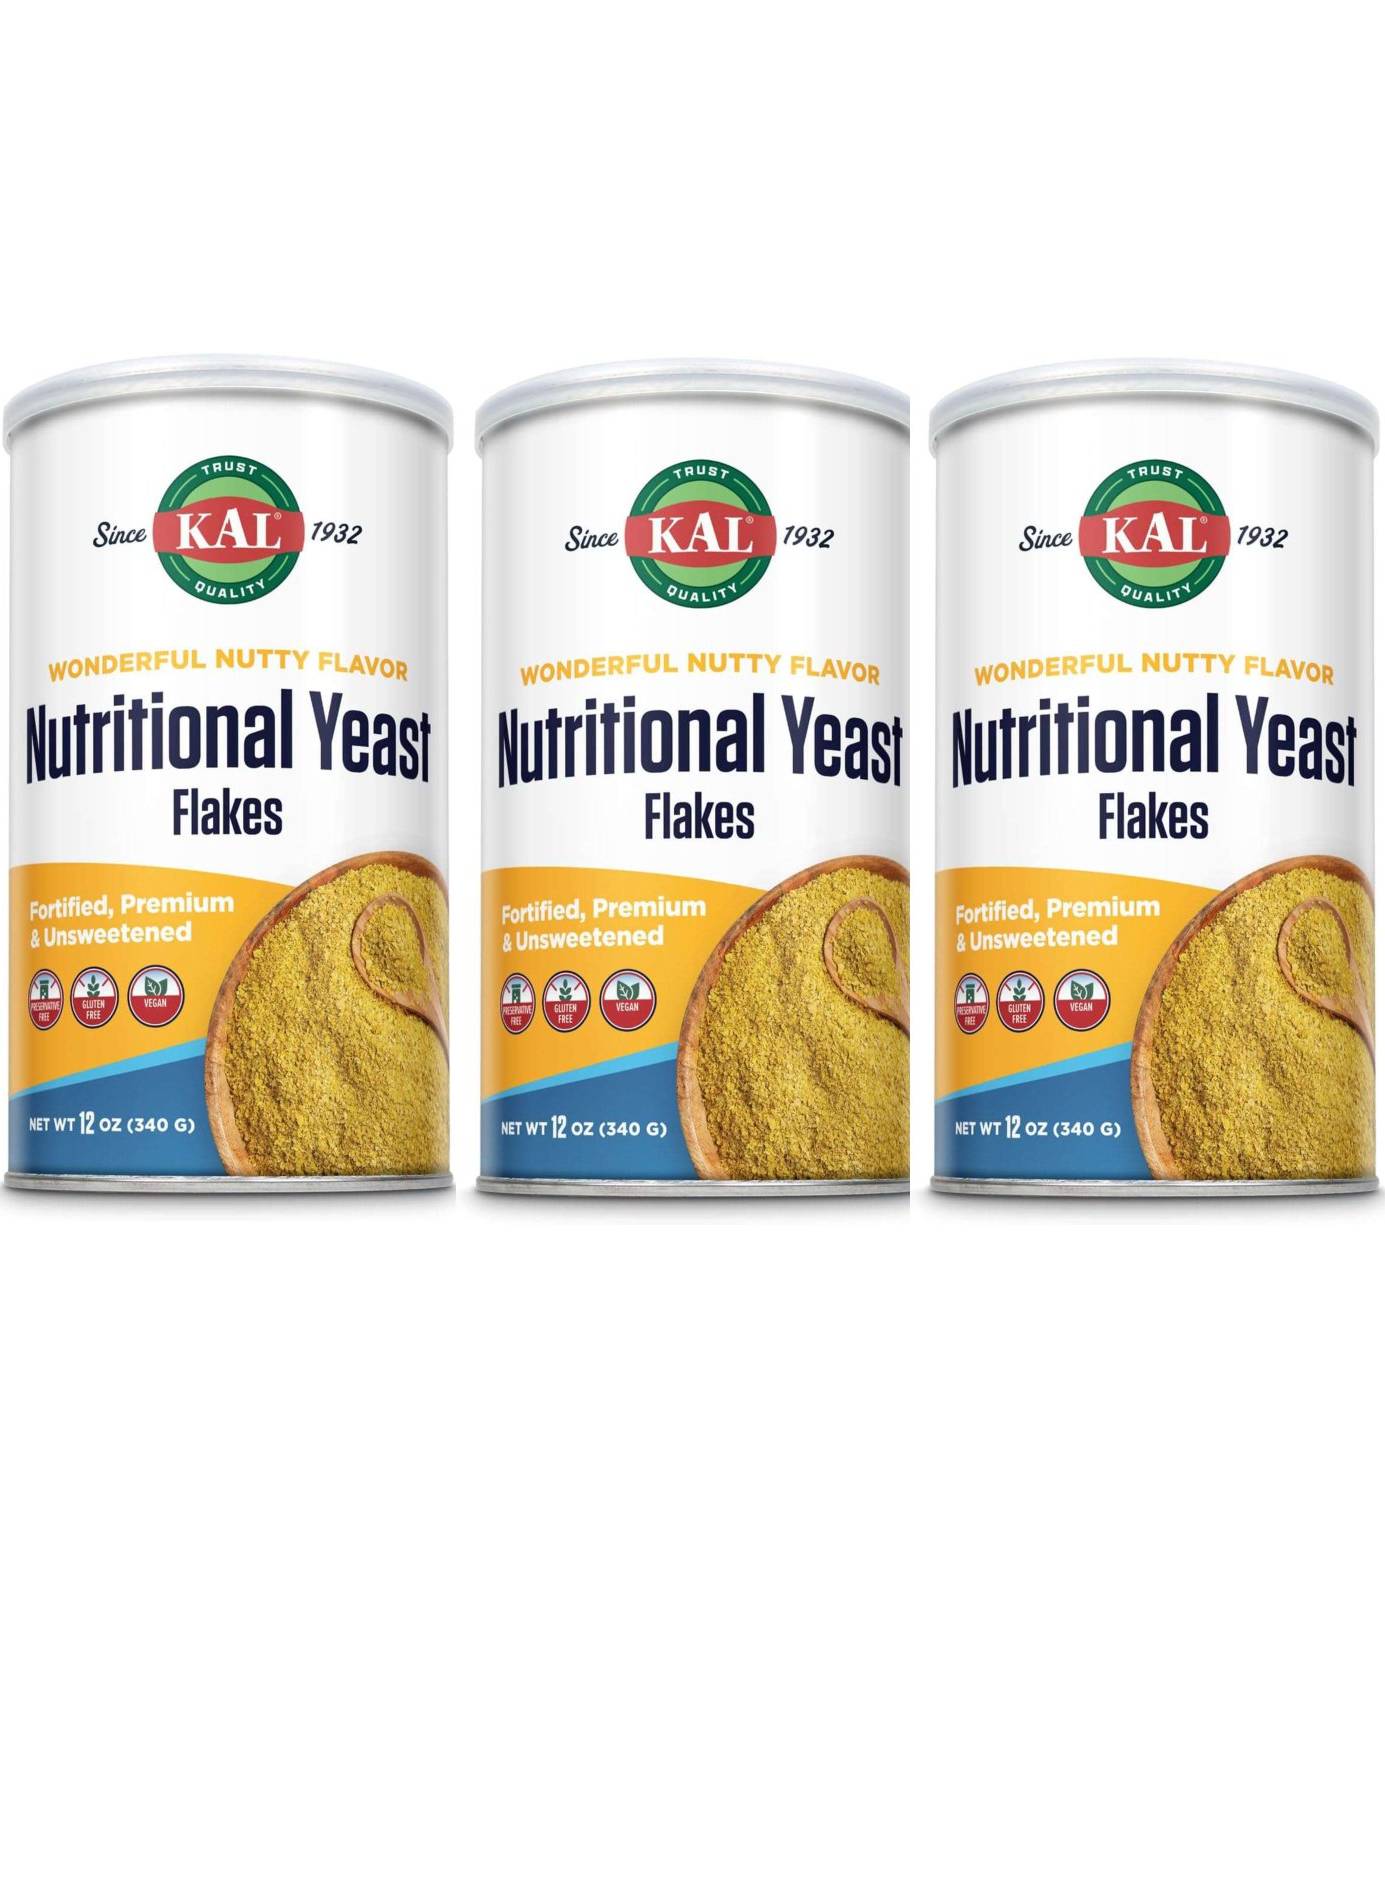 Kal: Nutritional Yeast Flakes 3 Pack 3 x 12oz